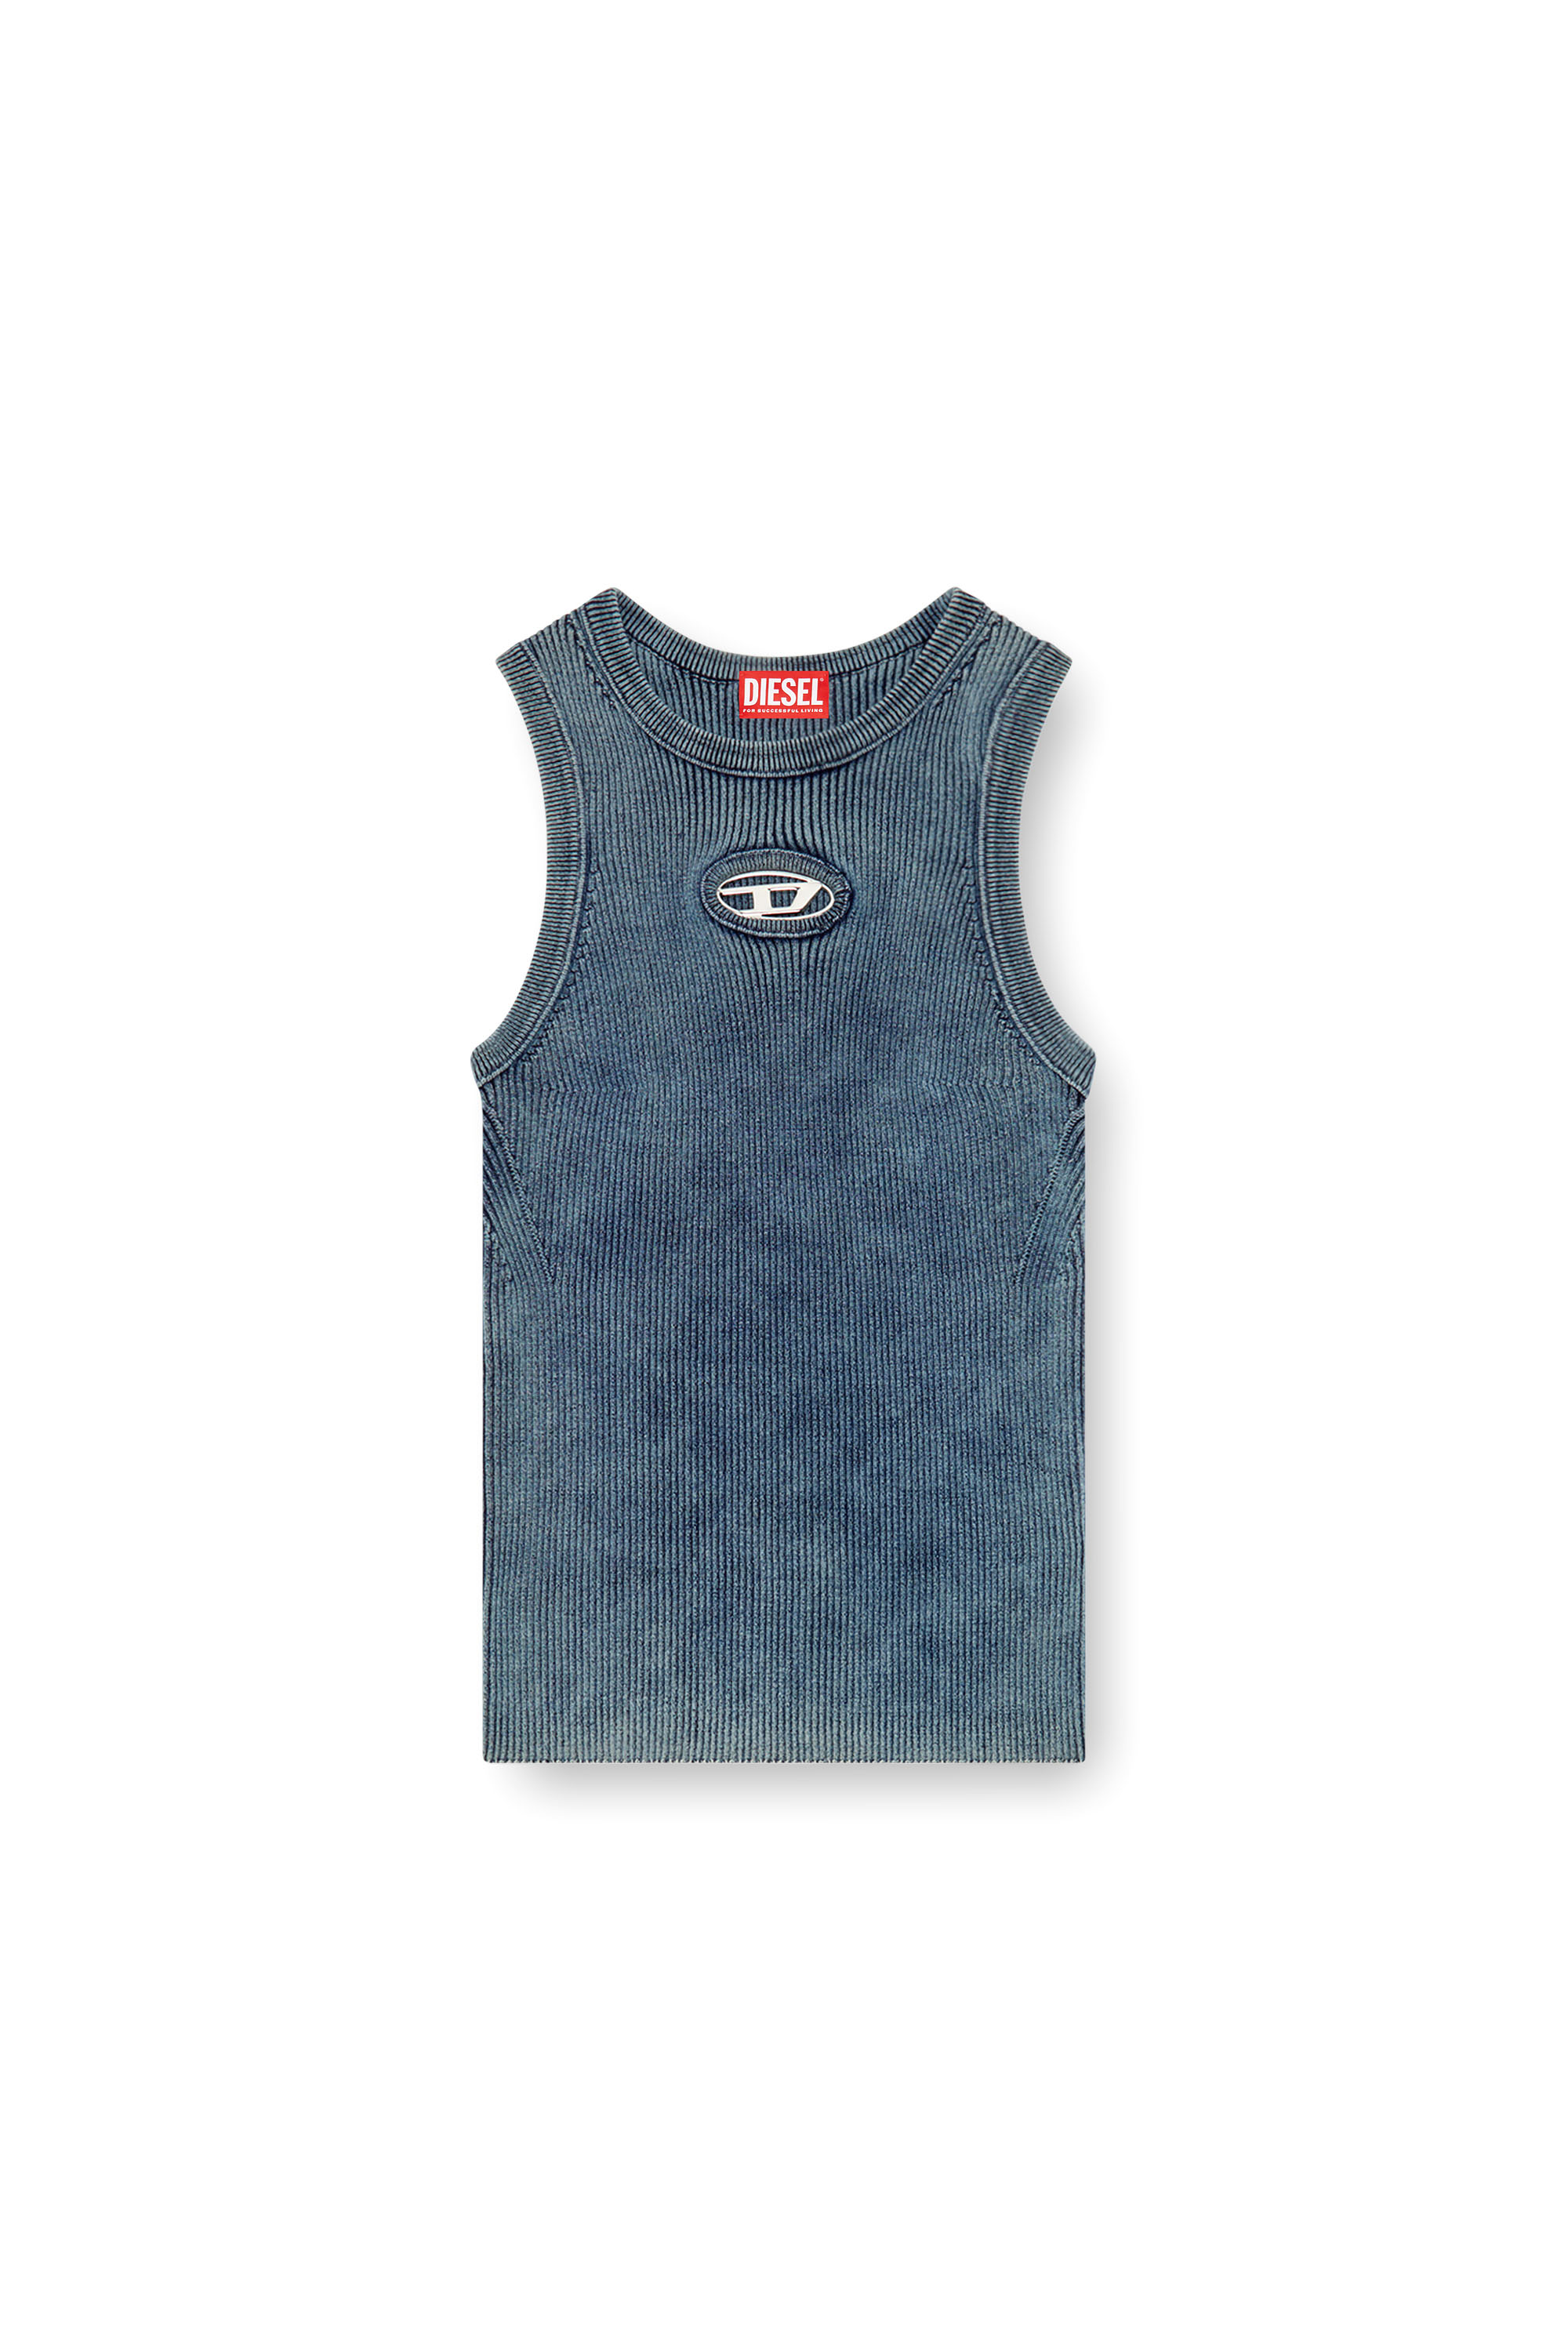 Diesel - M-ANCHOR-A-SL, Female Rib-knit tank top with Oval D in ブルー - Image 5